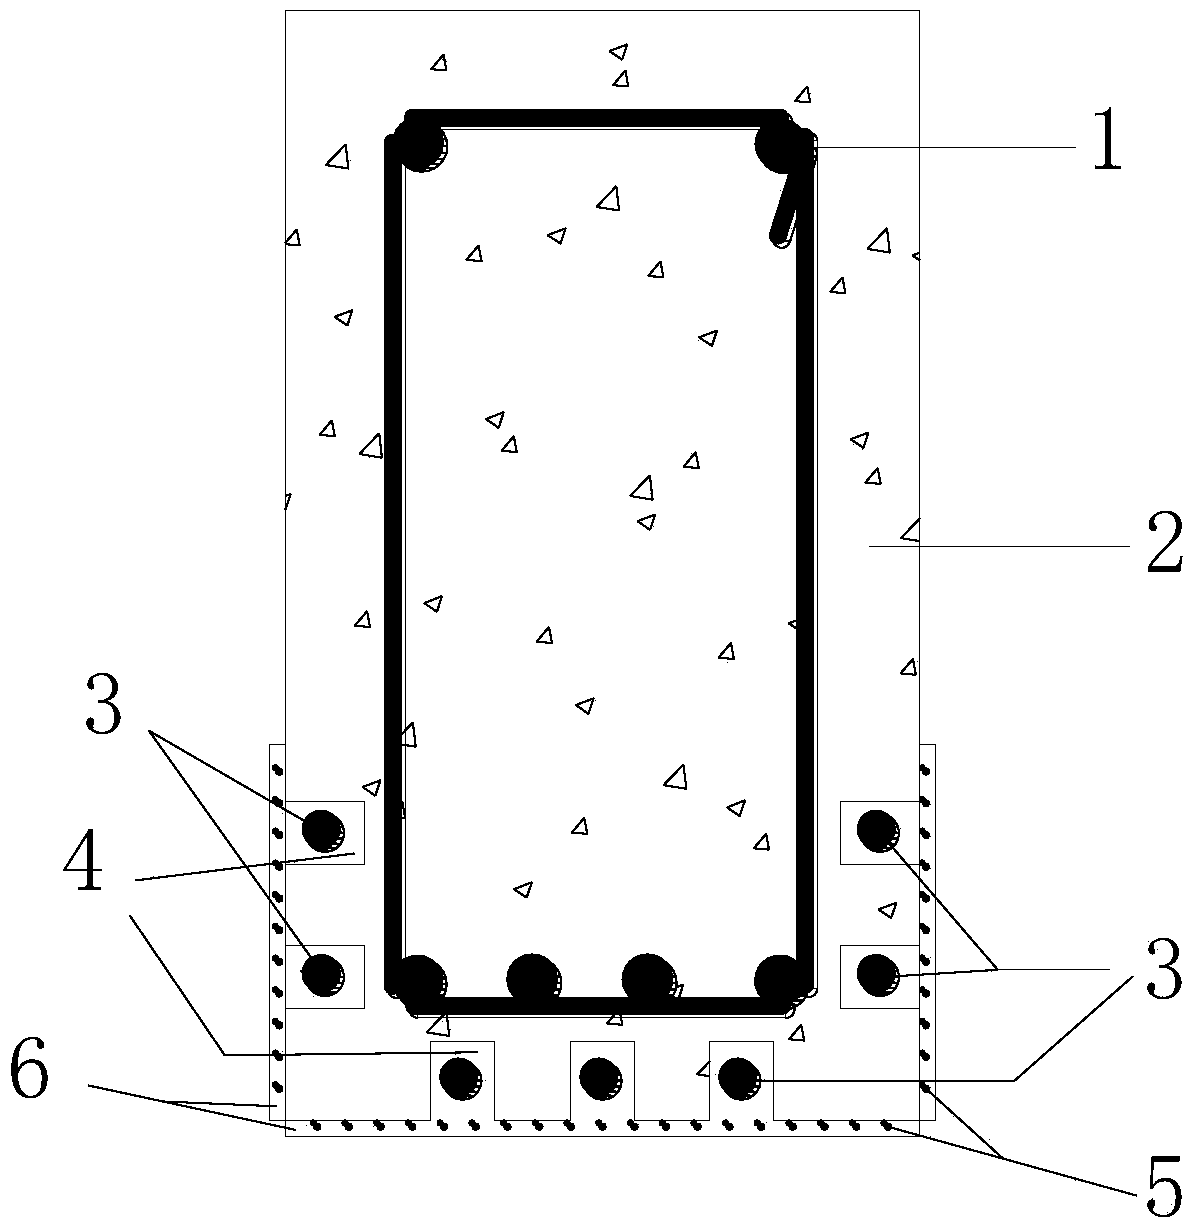 Method for repairing and reinforcing concrete structure under severe environment